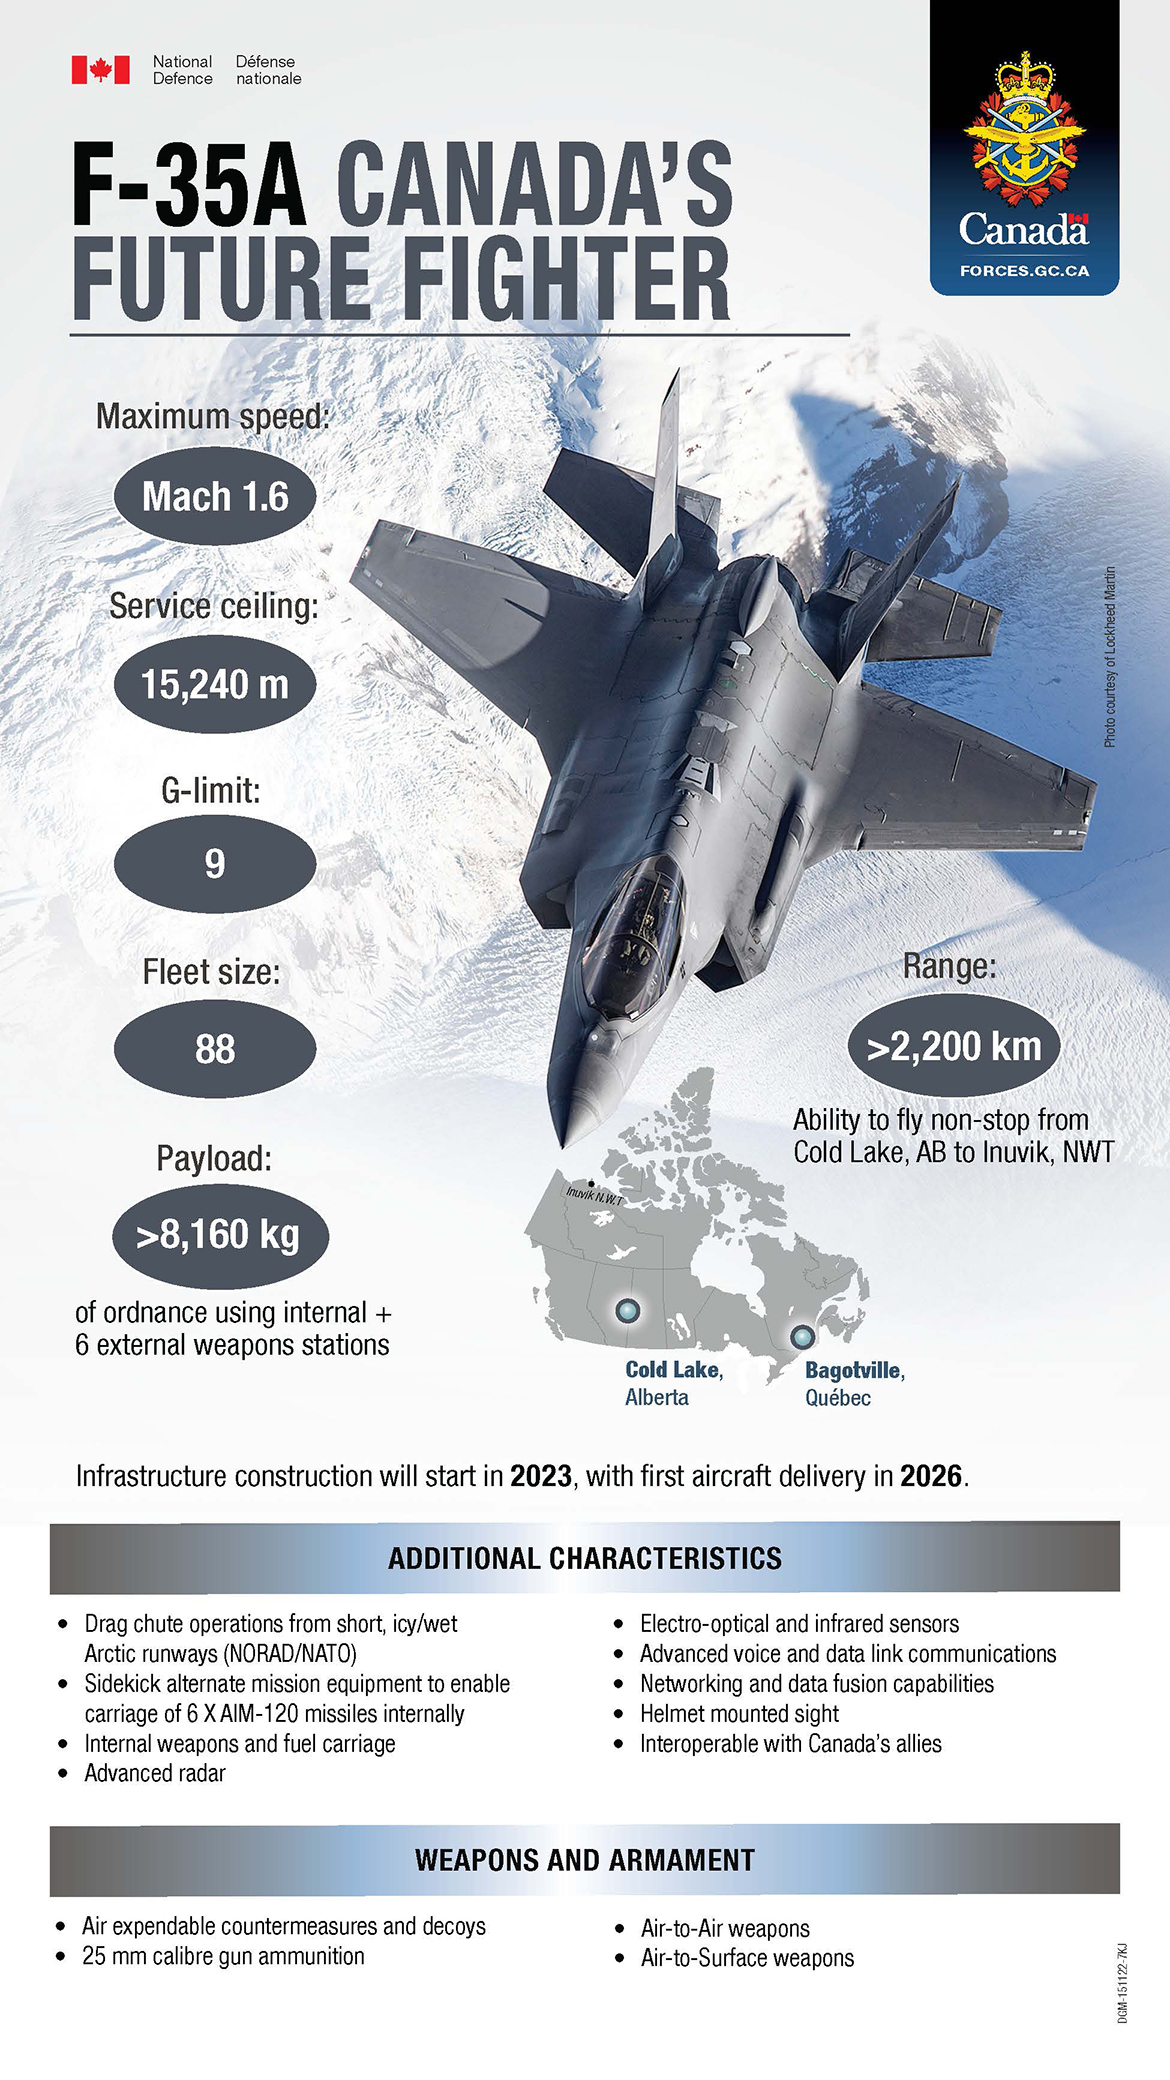 F-35A Canada's Future Fighter - Image of an F-35A taken from above with snow-covered mountains below